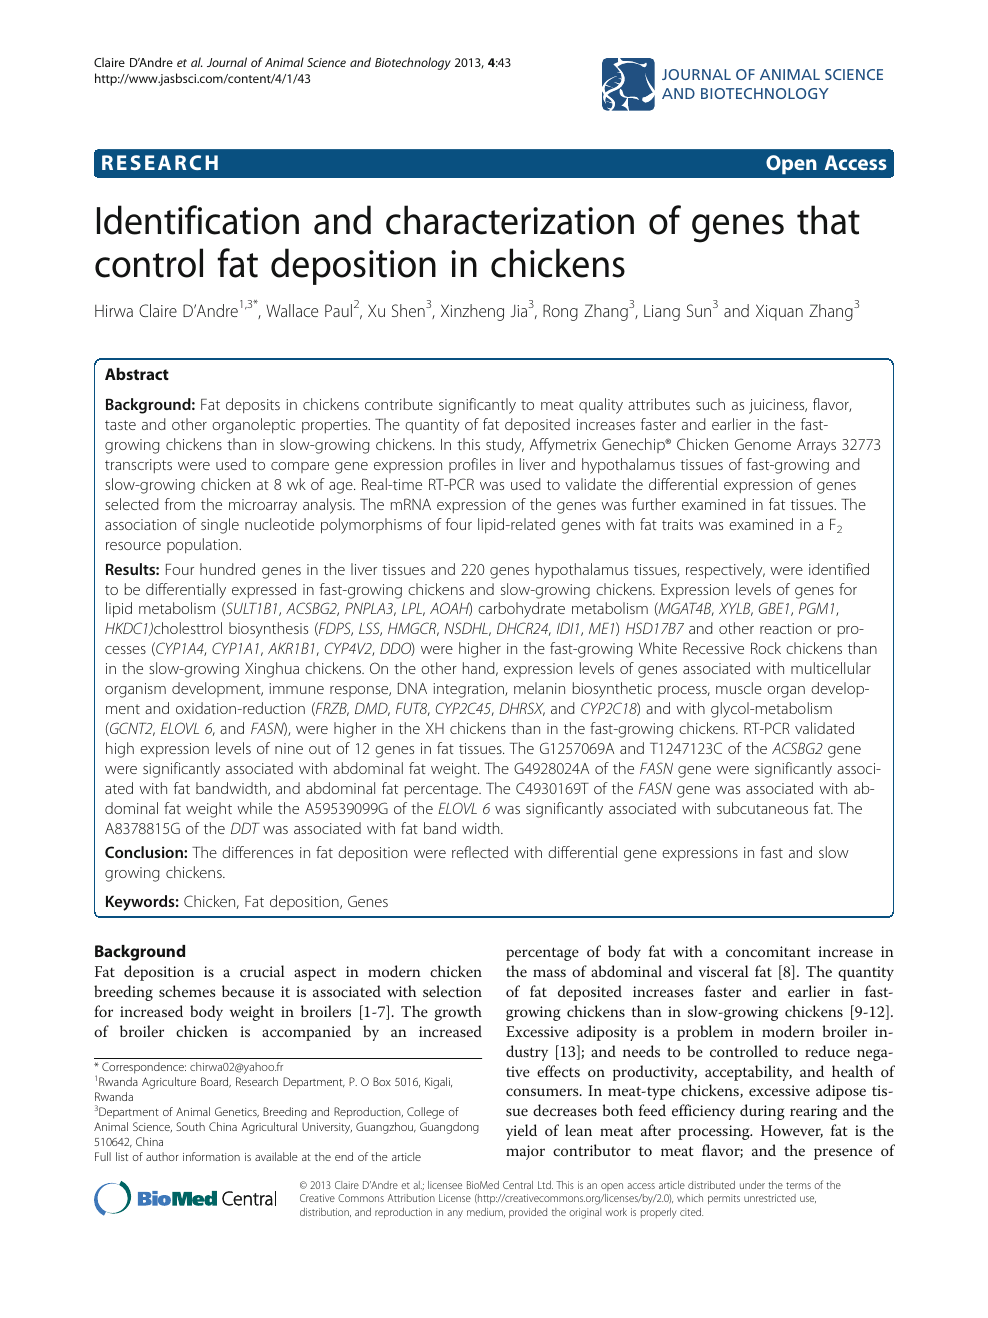 Identification and characterization of genes that control fat deposition in  chickens – topic of research paper in Veterinary science. Download  scholarly article PDF and read for free on CyberLeninka open science hub.